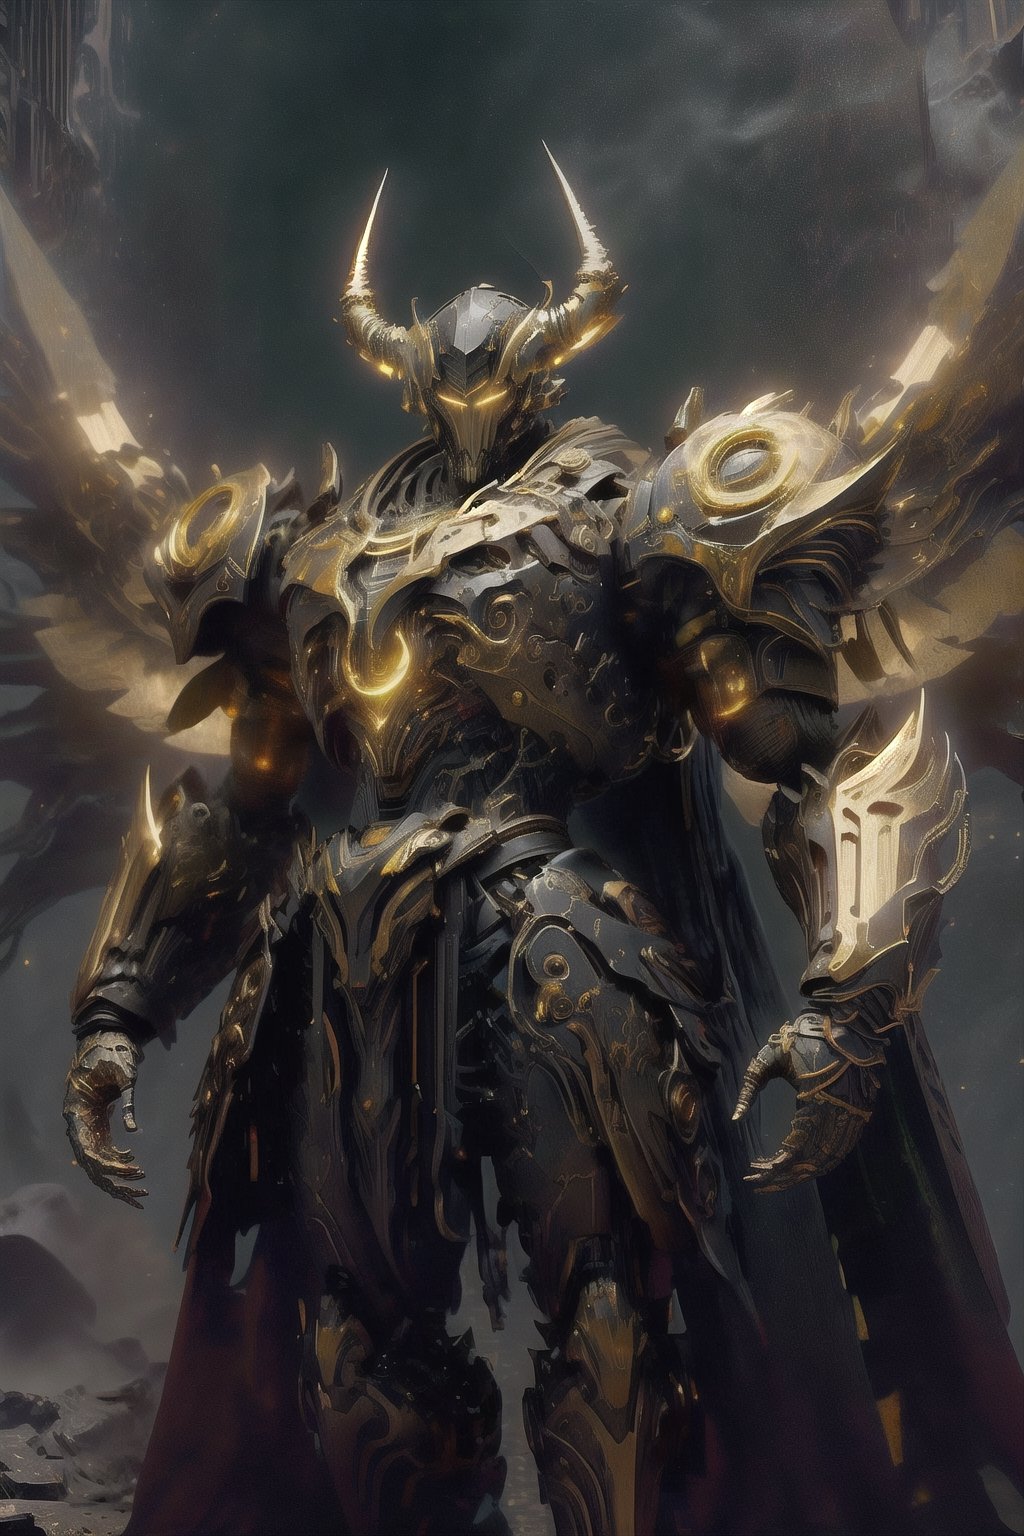 Create image of a futuristic, biomechanical warrior standing majestically. The figure is predominantly ivory and metallic gold with orange-glowing intricate patterns resembling circuitry across the body. Style is detailed and hyper-realistic, textures suggesting both organic and synthetic materials. The warrior's armor is highly ornamental and segmented, comprising layered plate-like structures with curvilinear edges and sharp spikes. The helmet features elongated, horn-like protrusions that arch backwards and taper to fine points, with a V-shaped visor that obscures the eyes, emitting an orange glow. Proportions are heroic, slightly elongated and exaggerated, with broad shoulders and a tapered waist, creating an imposing presence. The armor's design is anatomical, with each piece following the form of the muscles beneath. The background is a deep space scene, predominantly black with soft white star highlights, providing contrast that emphasizes the figure. There are subtle nebulas with faint hints of blue and purple, adding depth but not distracting from the main subject. The foreground focuses on the figure, with no additional elements to challenge the dominance of the warrior. Light sources seem to come from multiple directions, creating dynamic lighting which accentuates the textures and details of the armor, especially the glowing patterns. science fiction, hdr, ray tracing, nvidia rtx, super-resolution, unreal 5, subsurface scattering, pbr texturing, post-processing, anisotropic filtering, depth of field, maximum clarity and sharpness, 